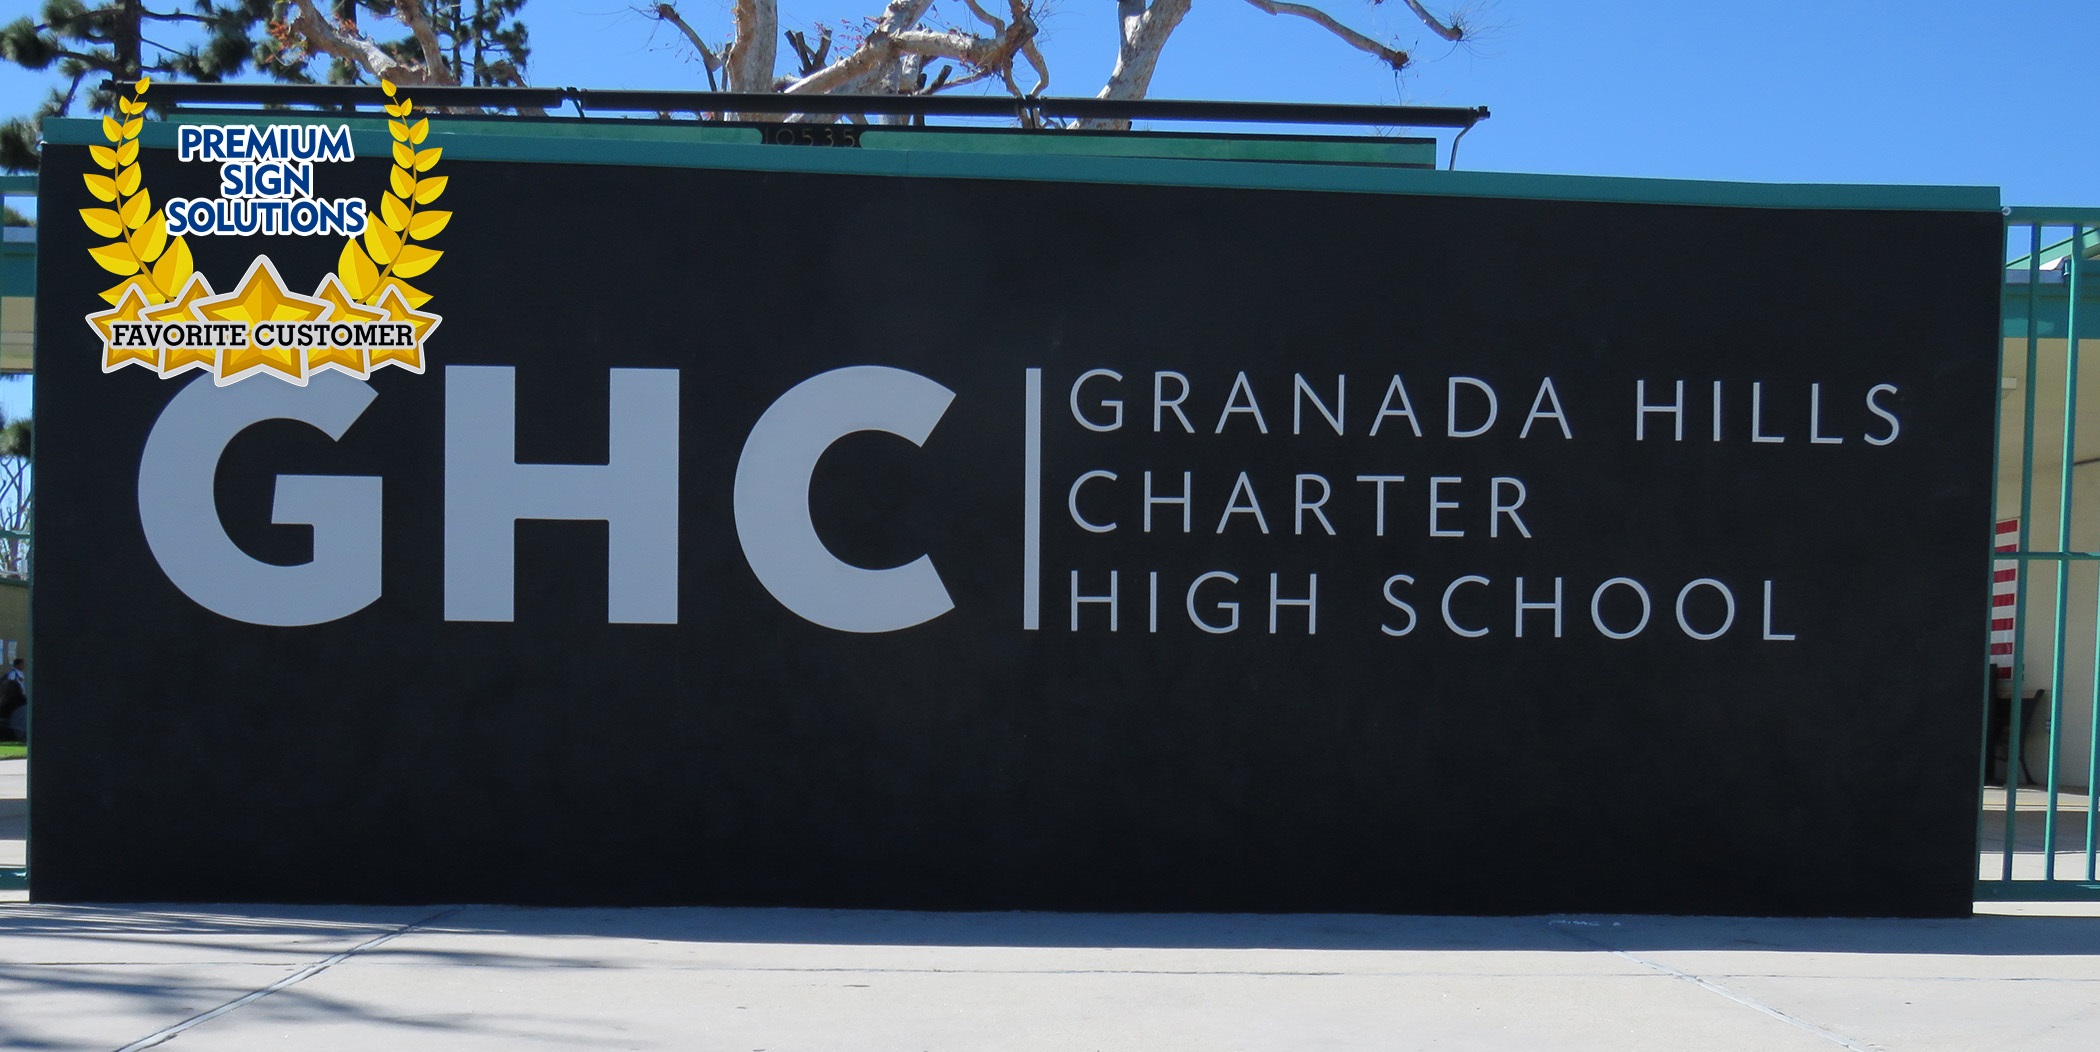 You are currently viewing Our Favorite Customers: Granada Hills Charter High School